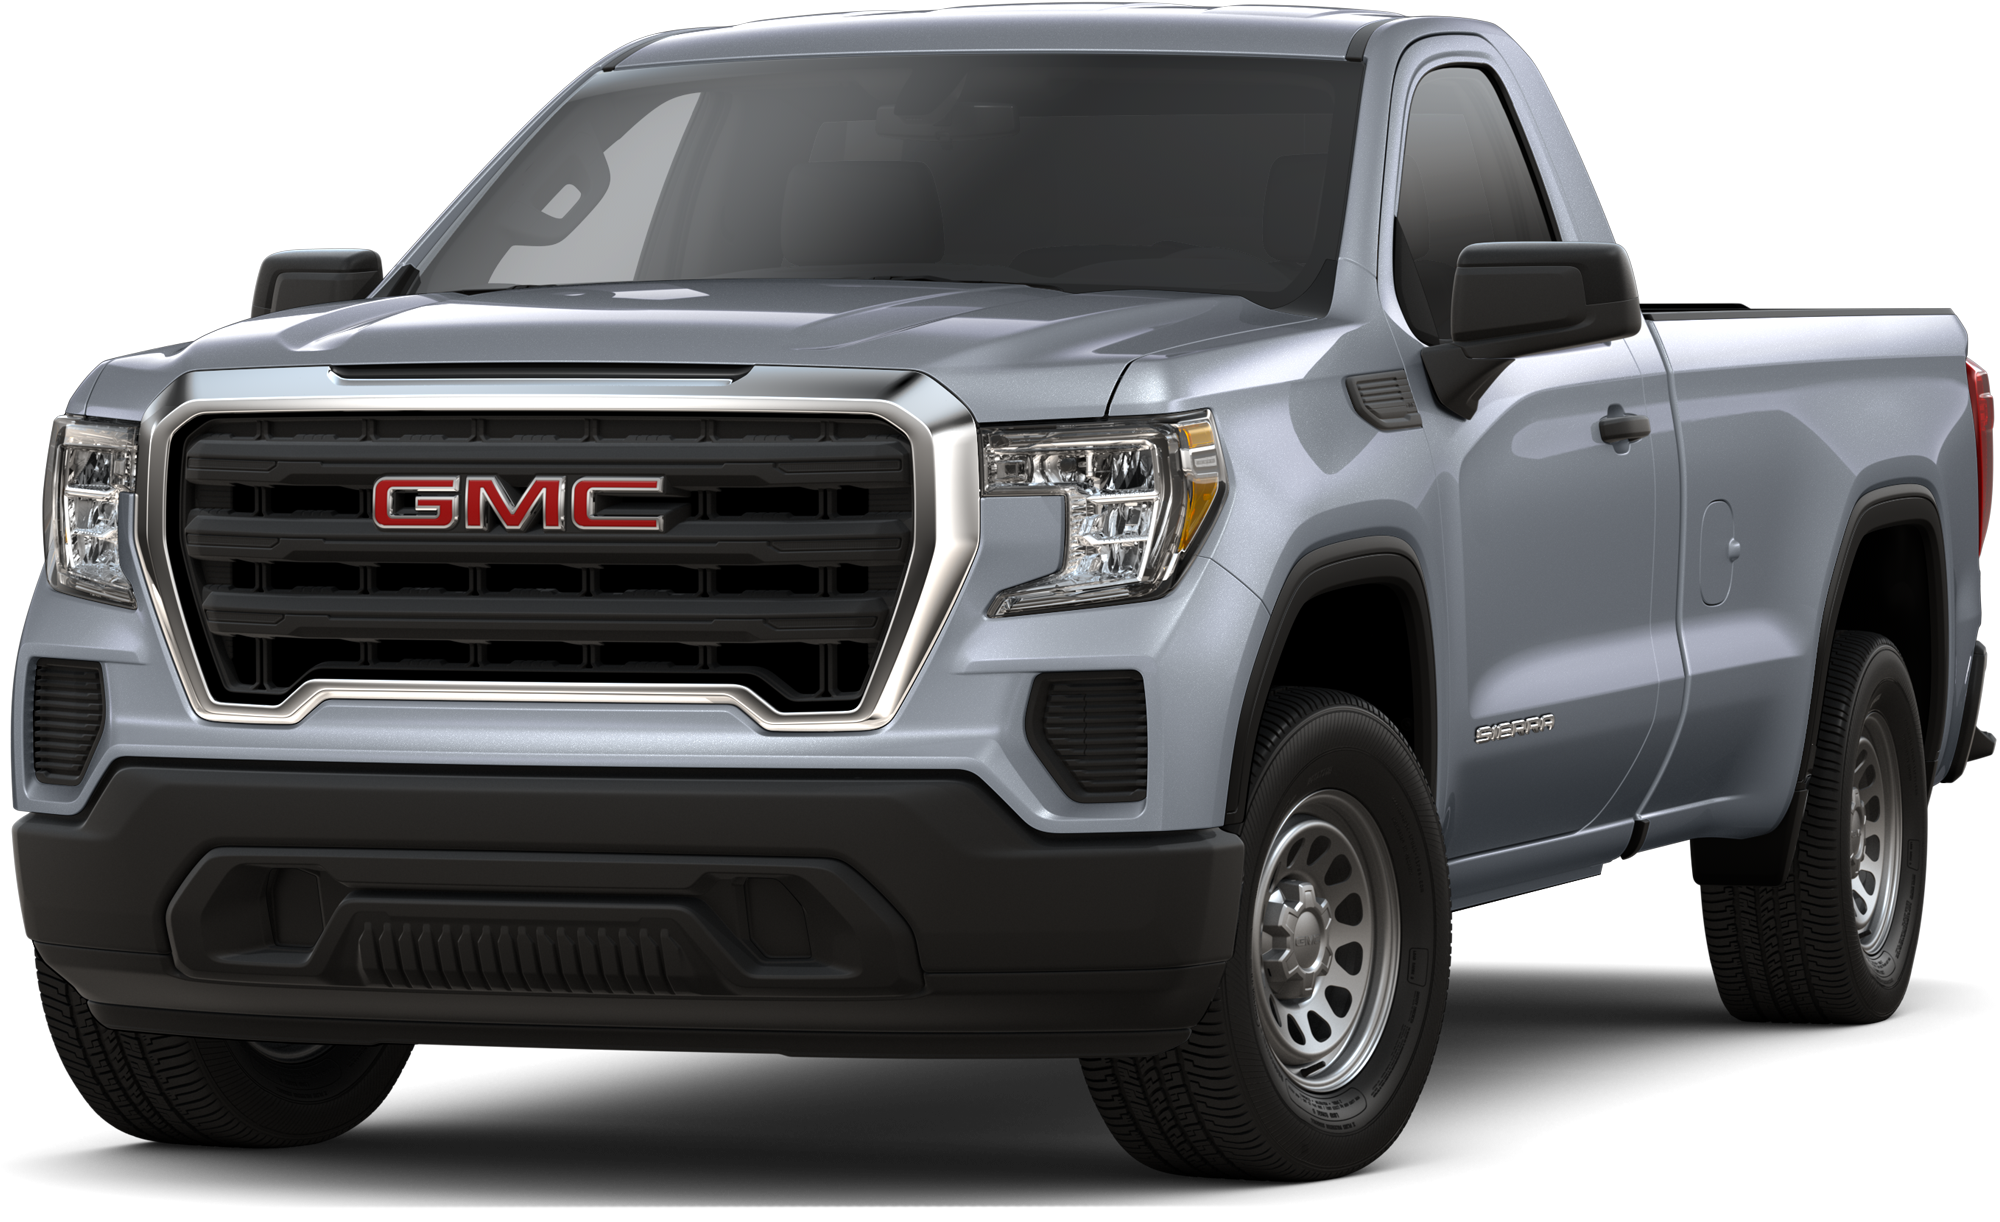 2020-gmc-sierra-1500-incentives-specials-offers-in-layton-ut